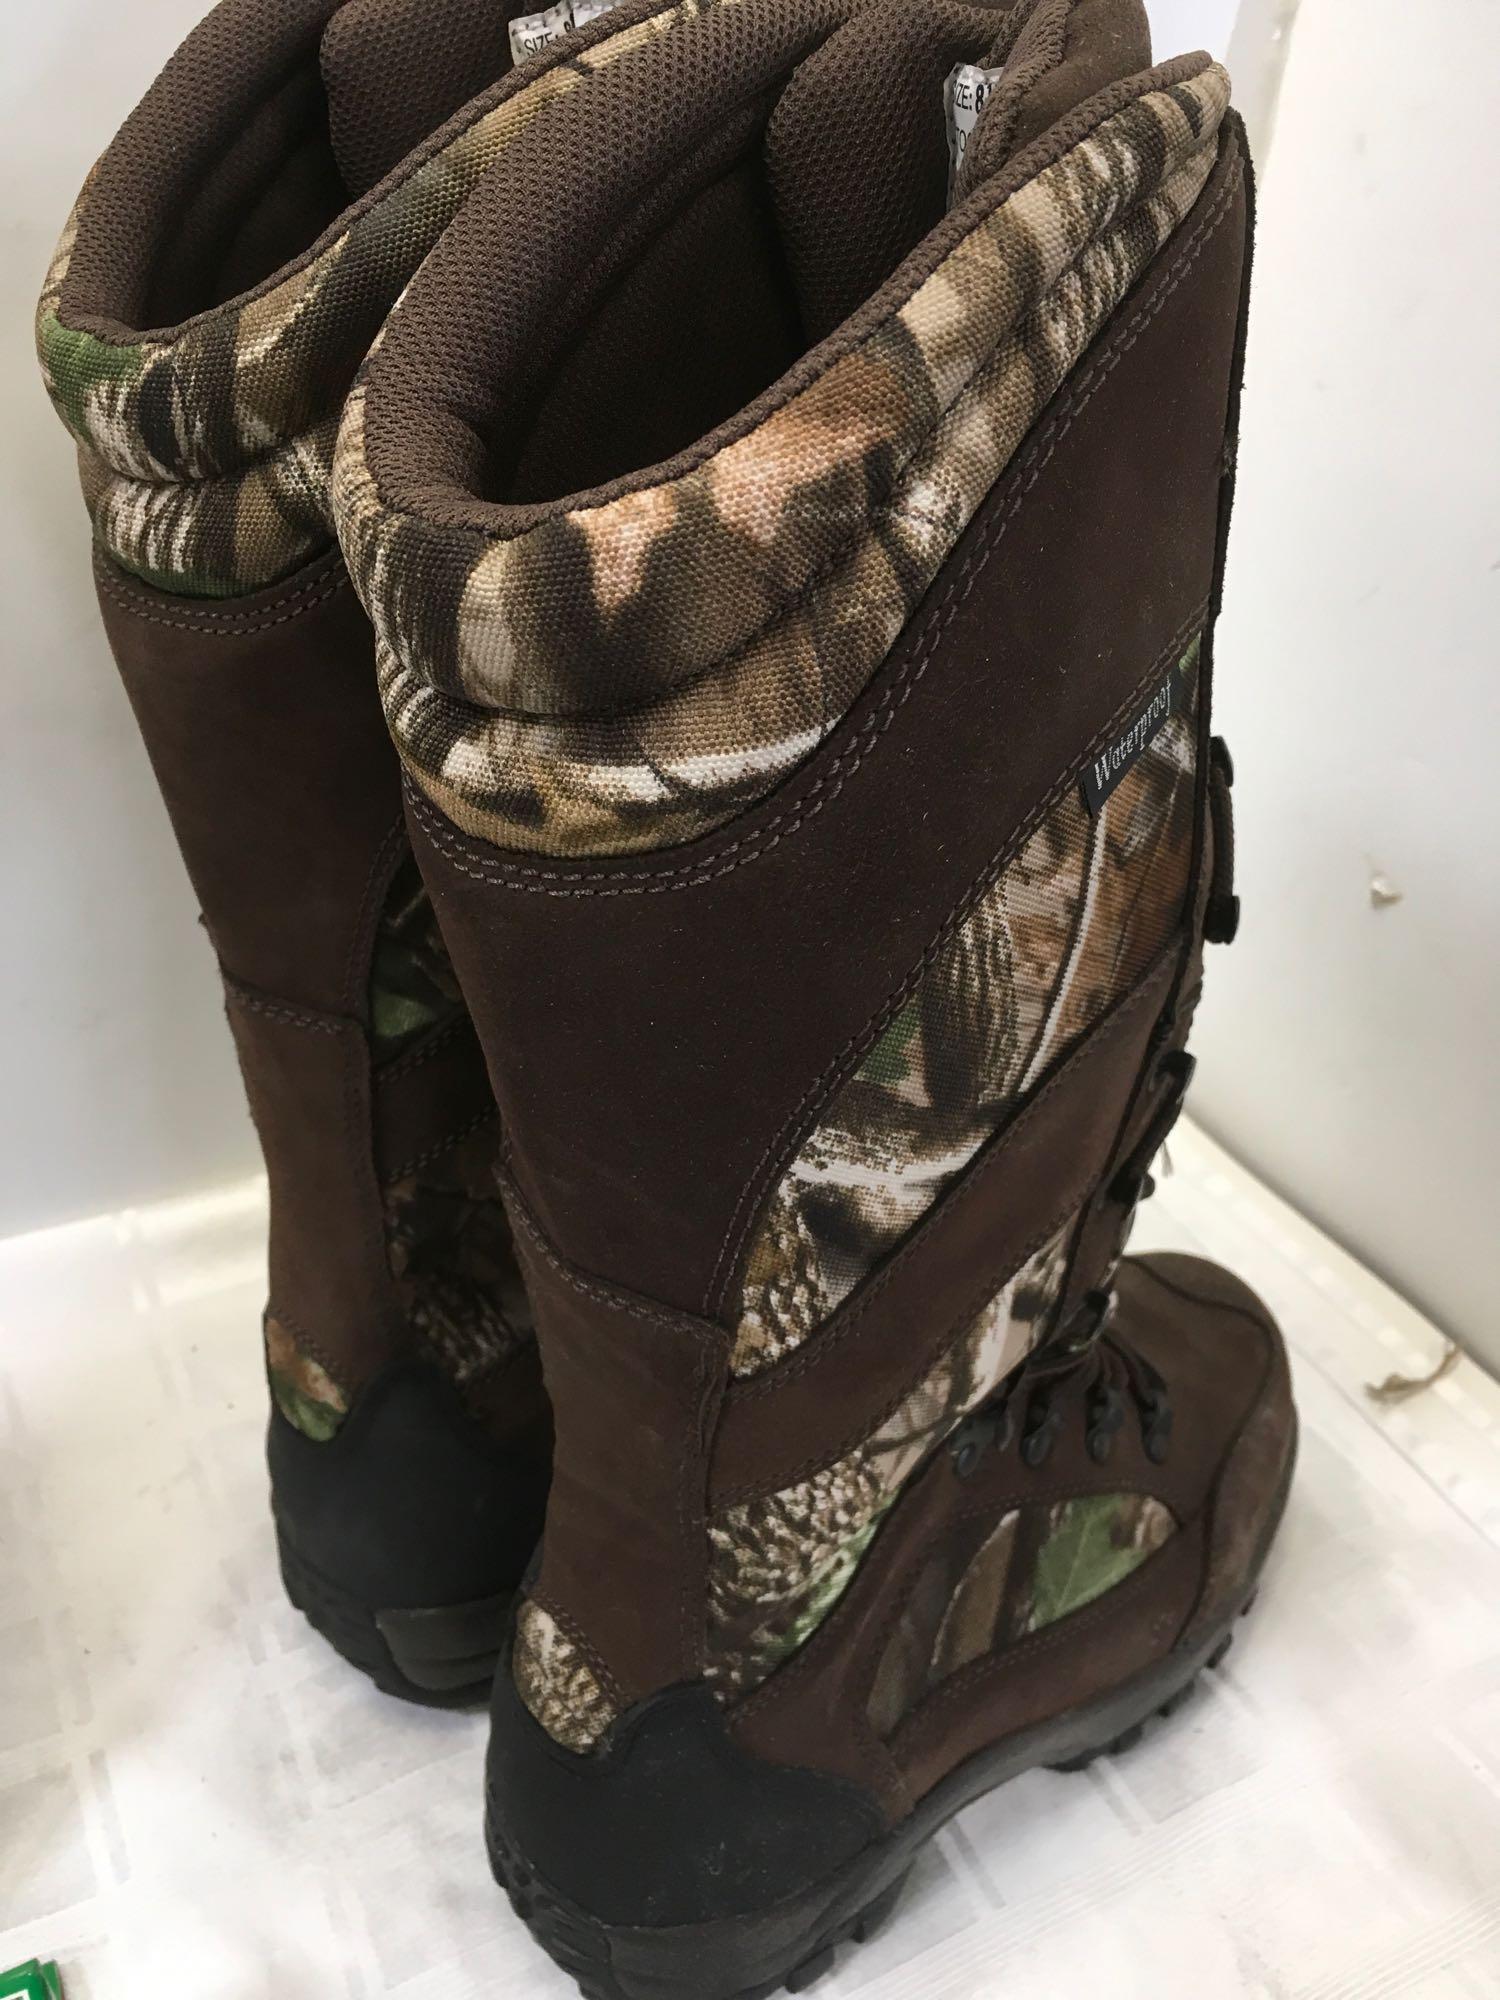 New Camo Hunting Boots size 8.5, Rocky footbed, foldable shovel and compass